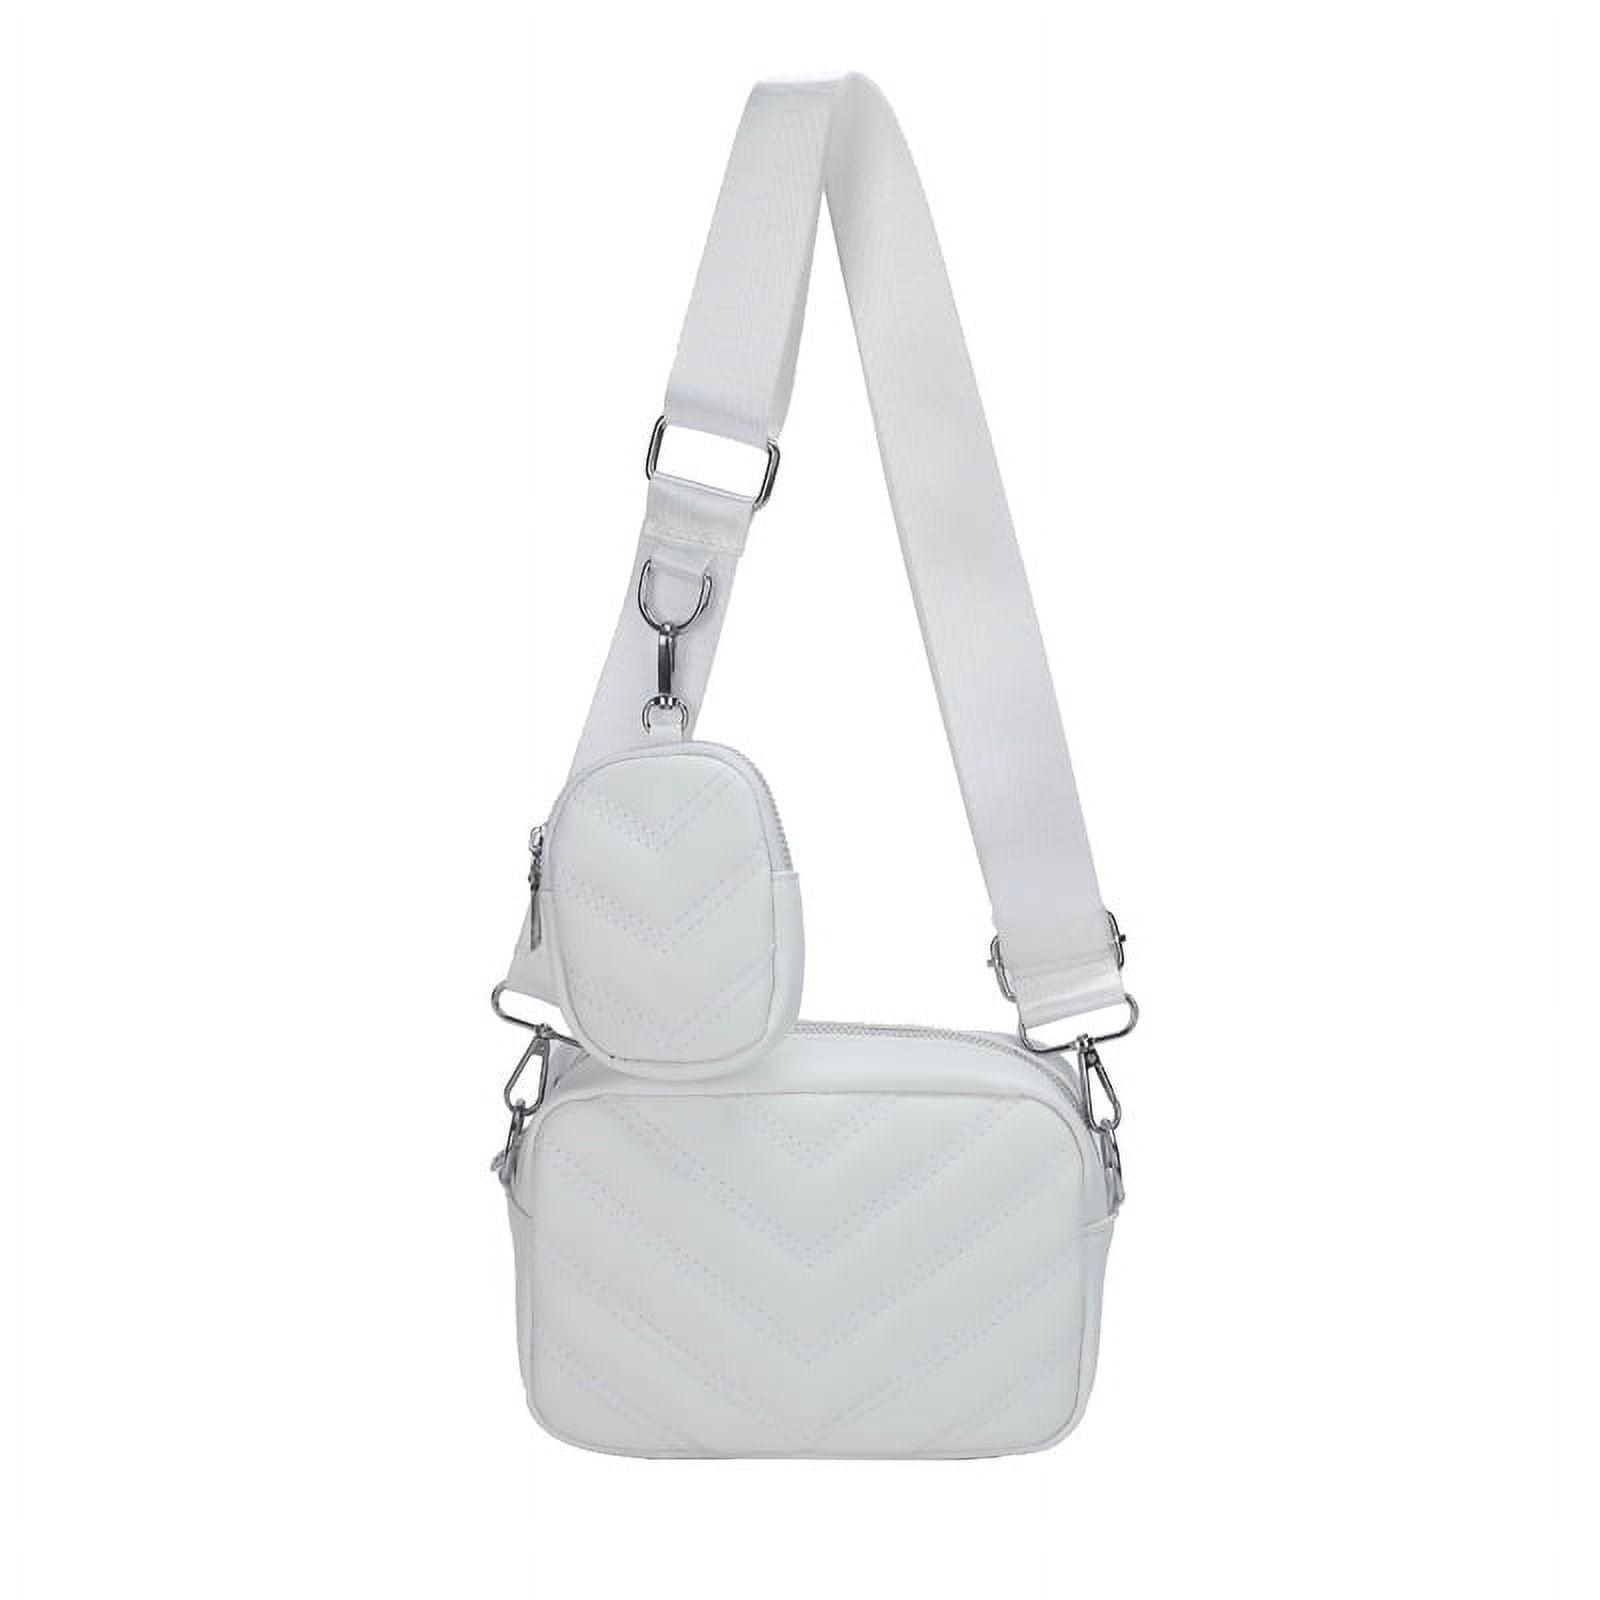 Crossbody Bag for Women Multipurpose Clutch Purse Shoulder Handbag with  Coin Purse and Chain(White)